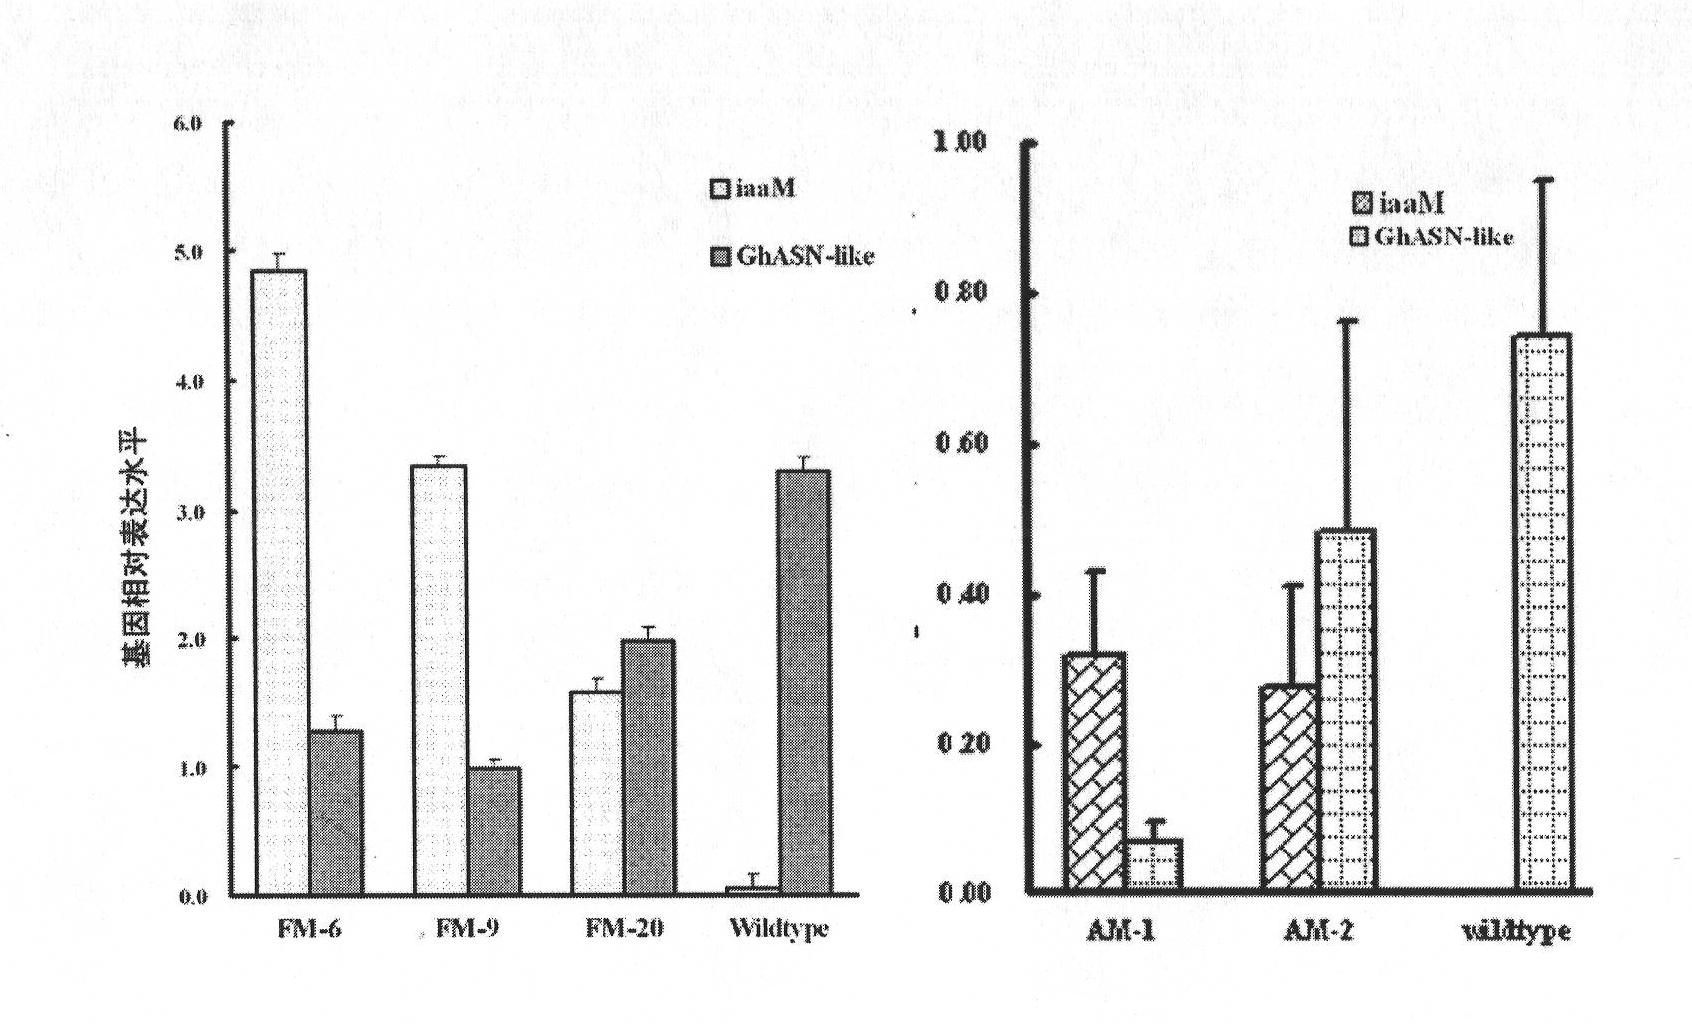 GhASN-like gene, expression vector and its application in raising cotton output